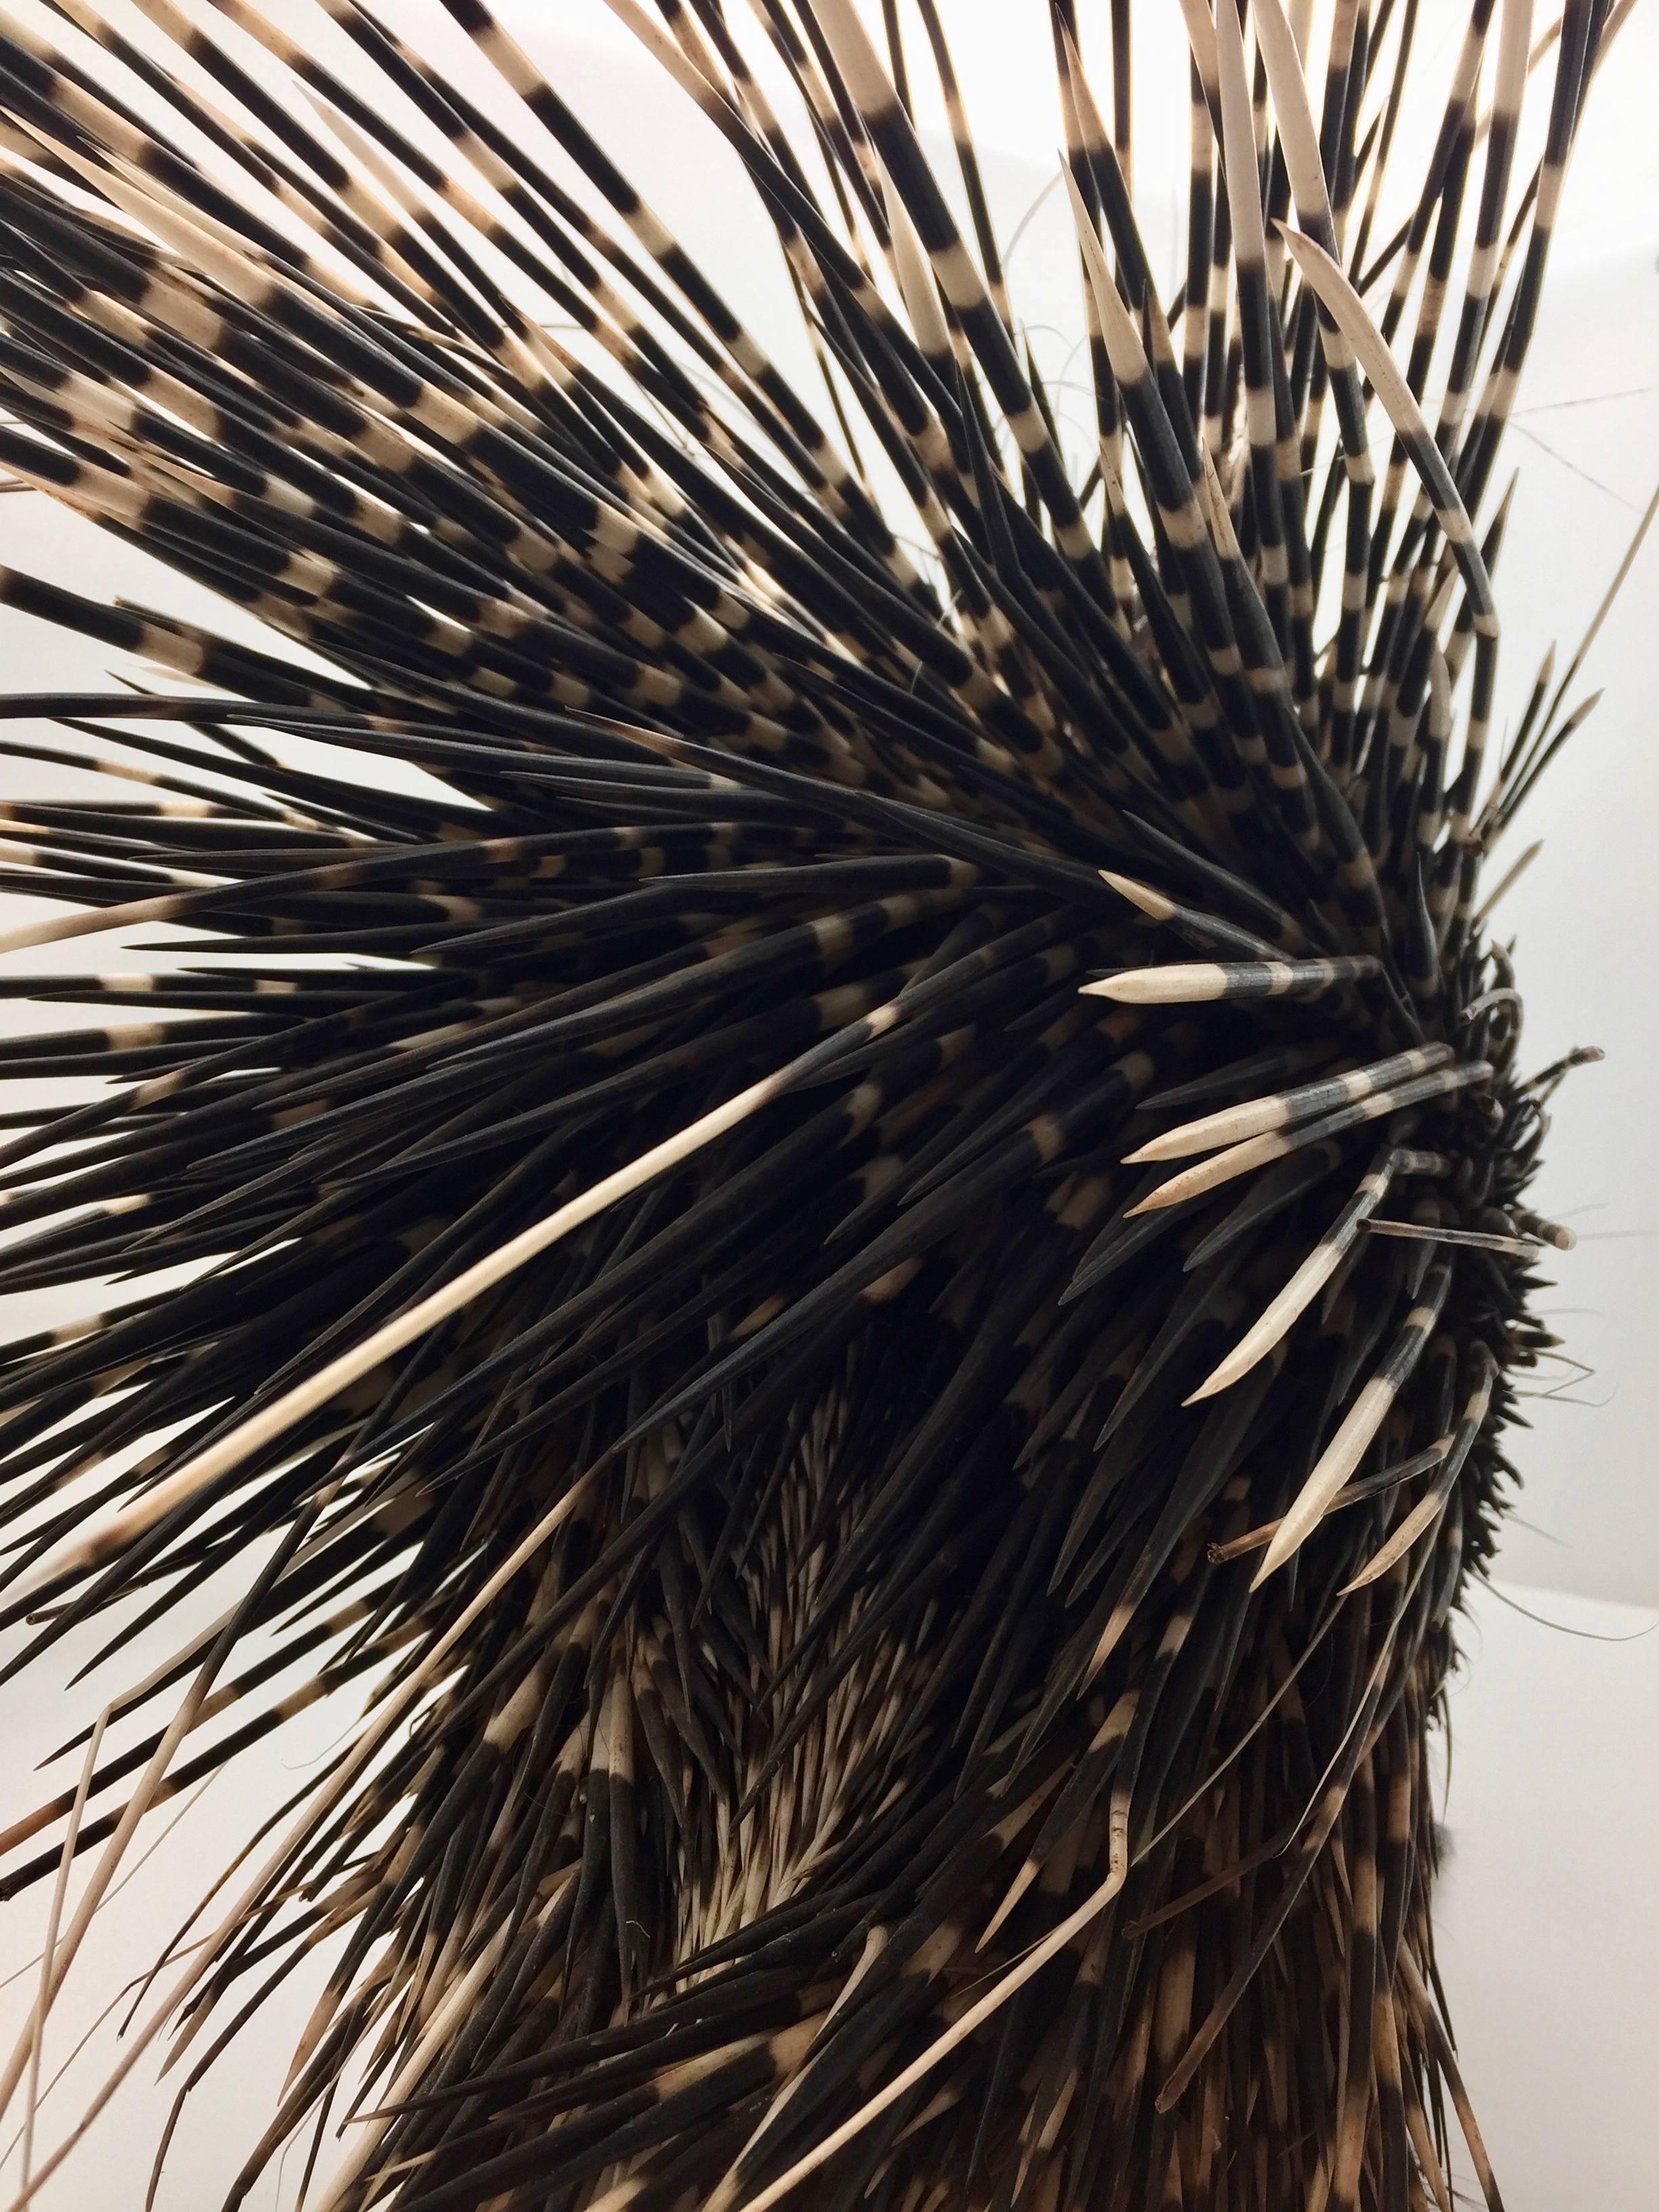 Large South African Crested Porcupine or Hystrix Cristata 1